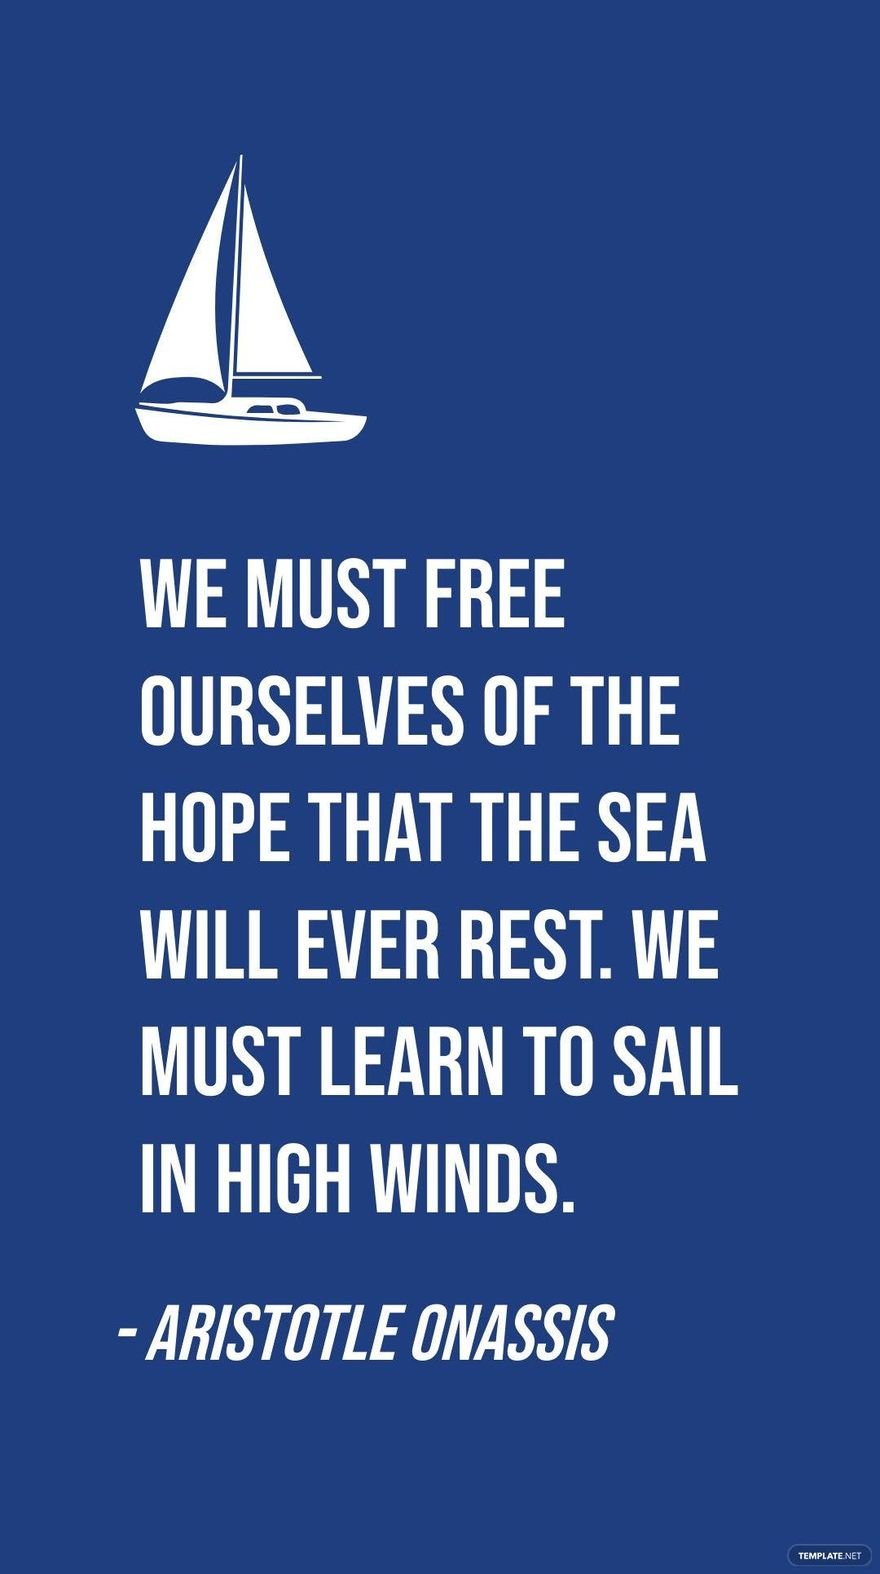 Aristotle Onassis - We must ourselves of the hope that the sea will ever rest. We must learn to sail in high winds.